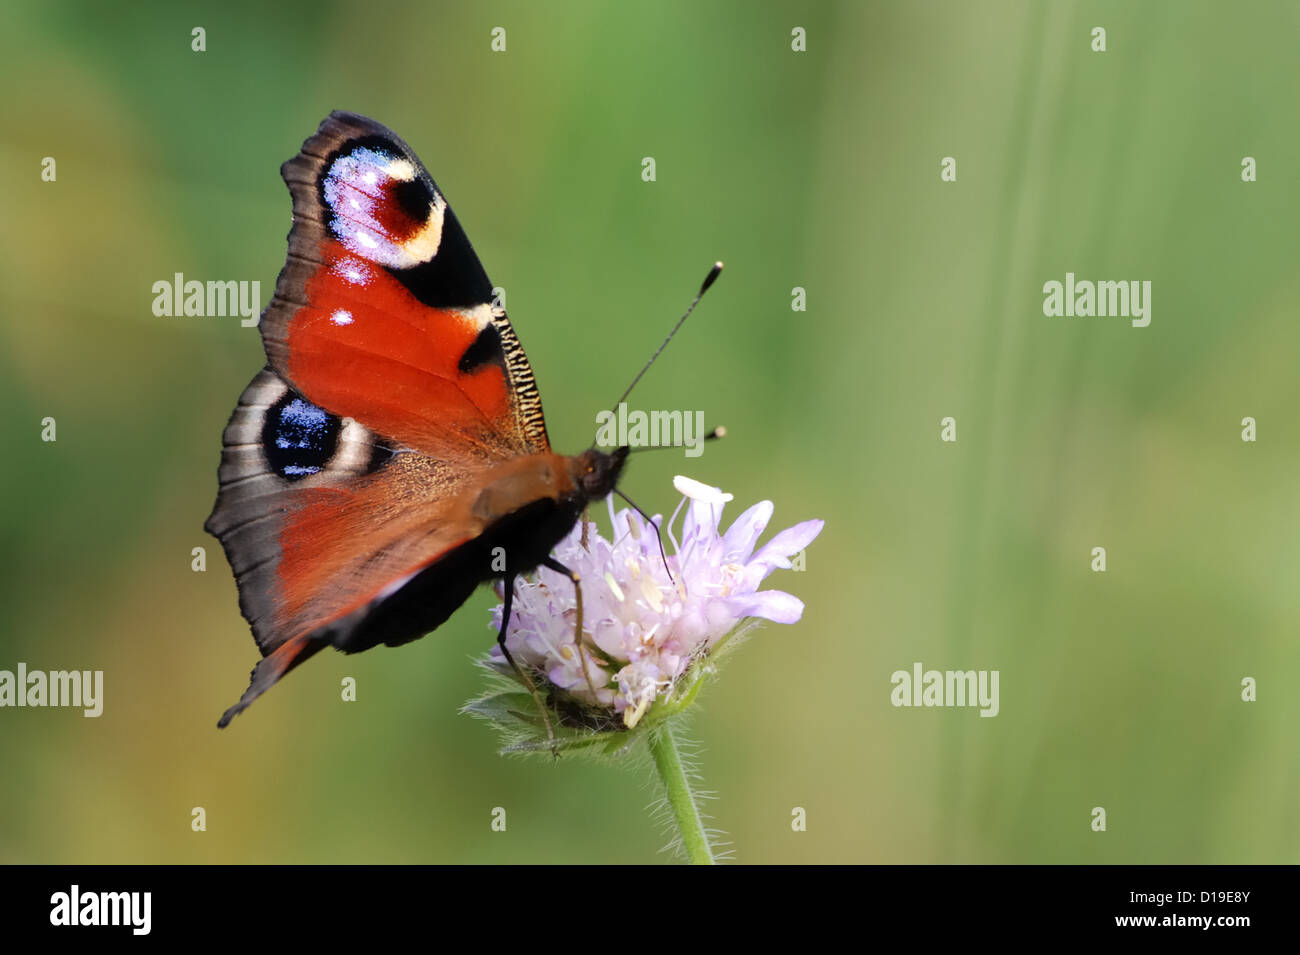 Peacock Butterfly (Inachis io) on a flower of field scabious (Knautia arvensis) Stock Photo